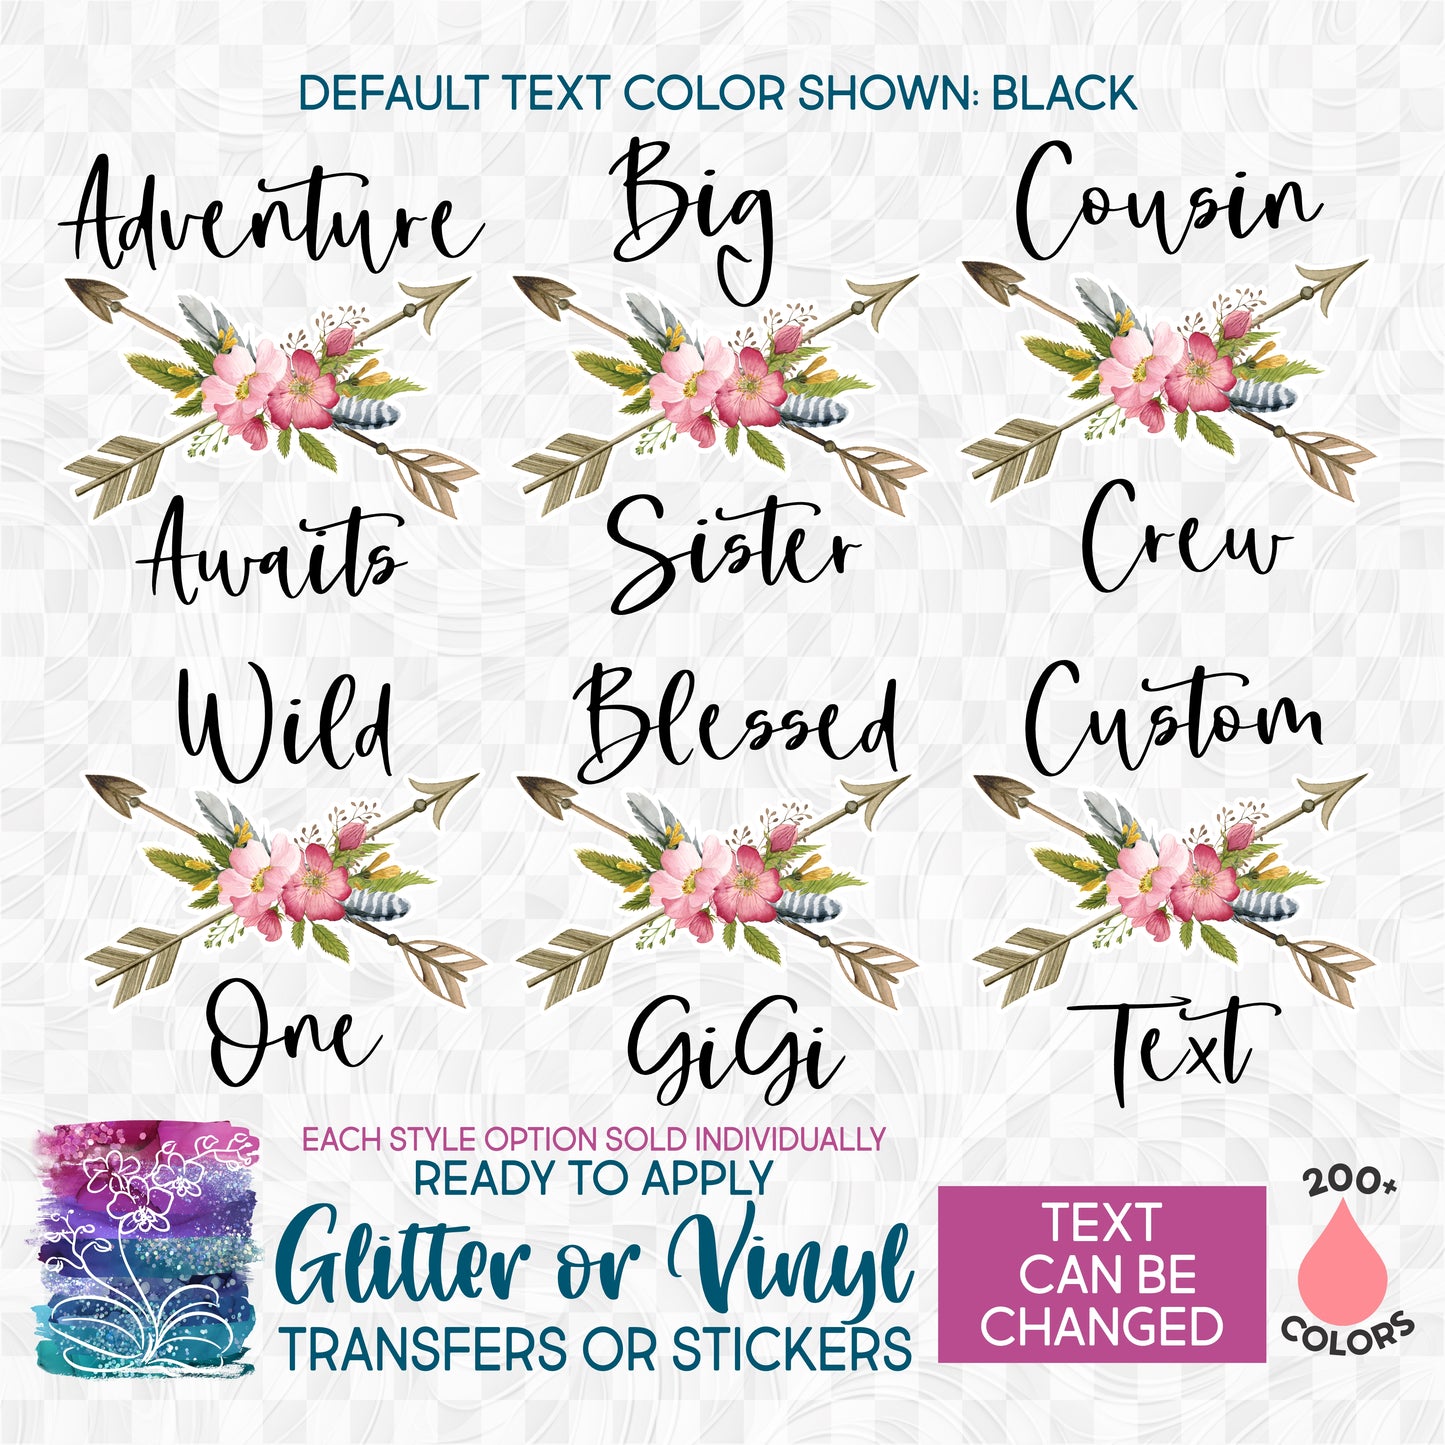 SBS-2-9 Wild Rose Arrow Watercolor Wild One Cousin Crew Adventure Awaits Blessed Big Little Sister Custom Text Made-to-Order Iron-On Transfer or Sticker